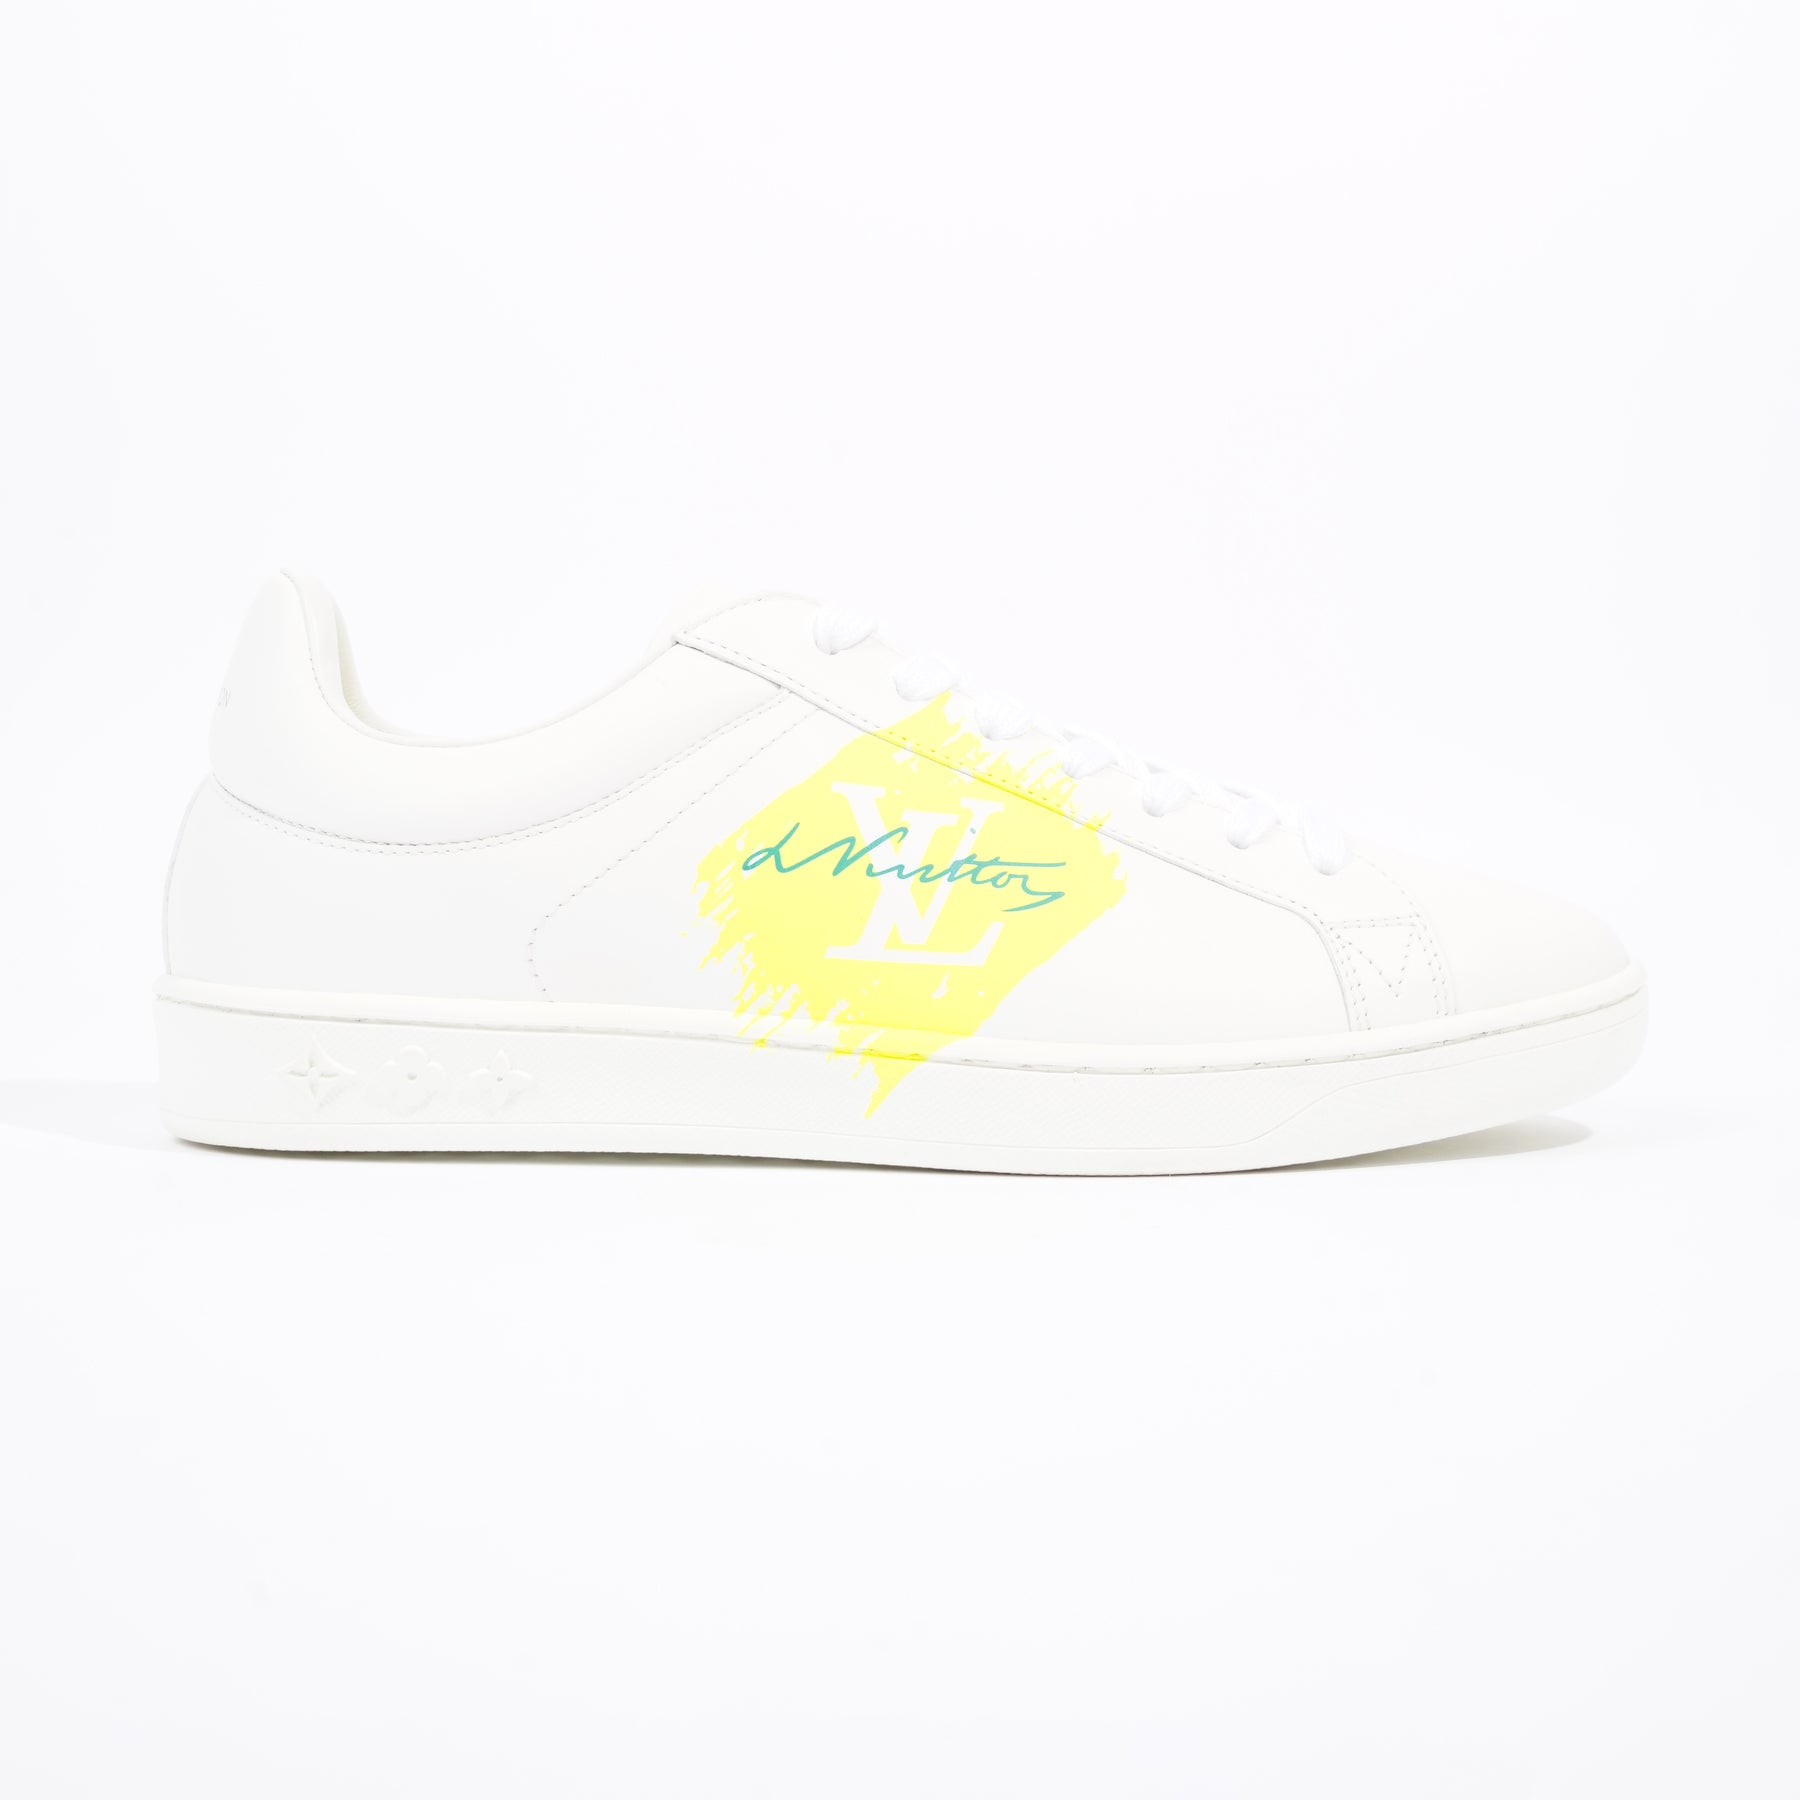 Louis Vuitton White Leather Luxembourg Sneakers Size 42 Louis Vuitton